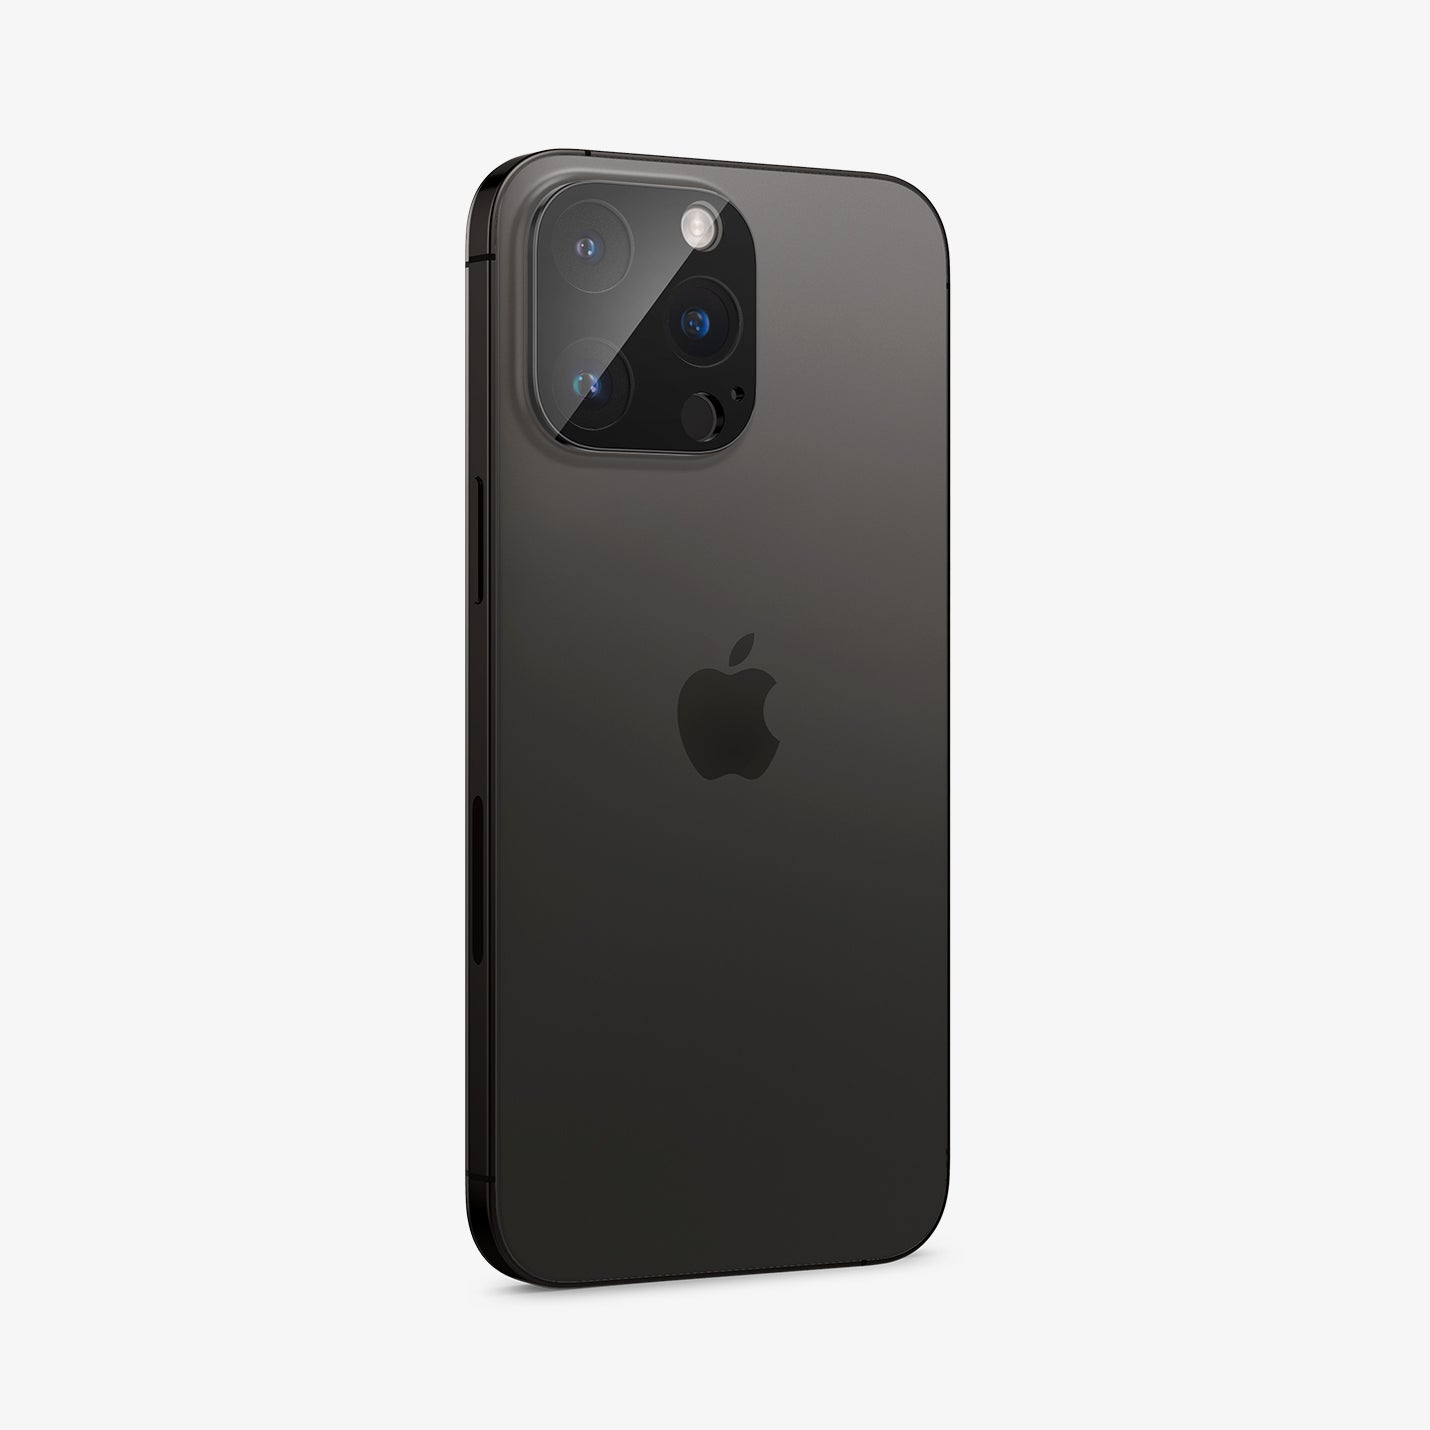 AGL06913 - iPhone 14 Pro / 14 Pro Max Optik Lens Protector in black showing the back and partial side